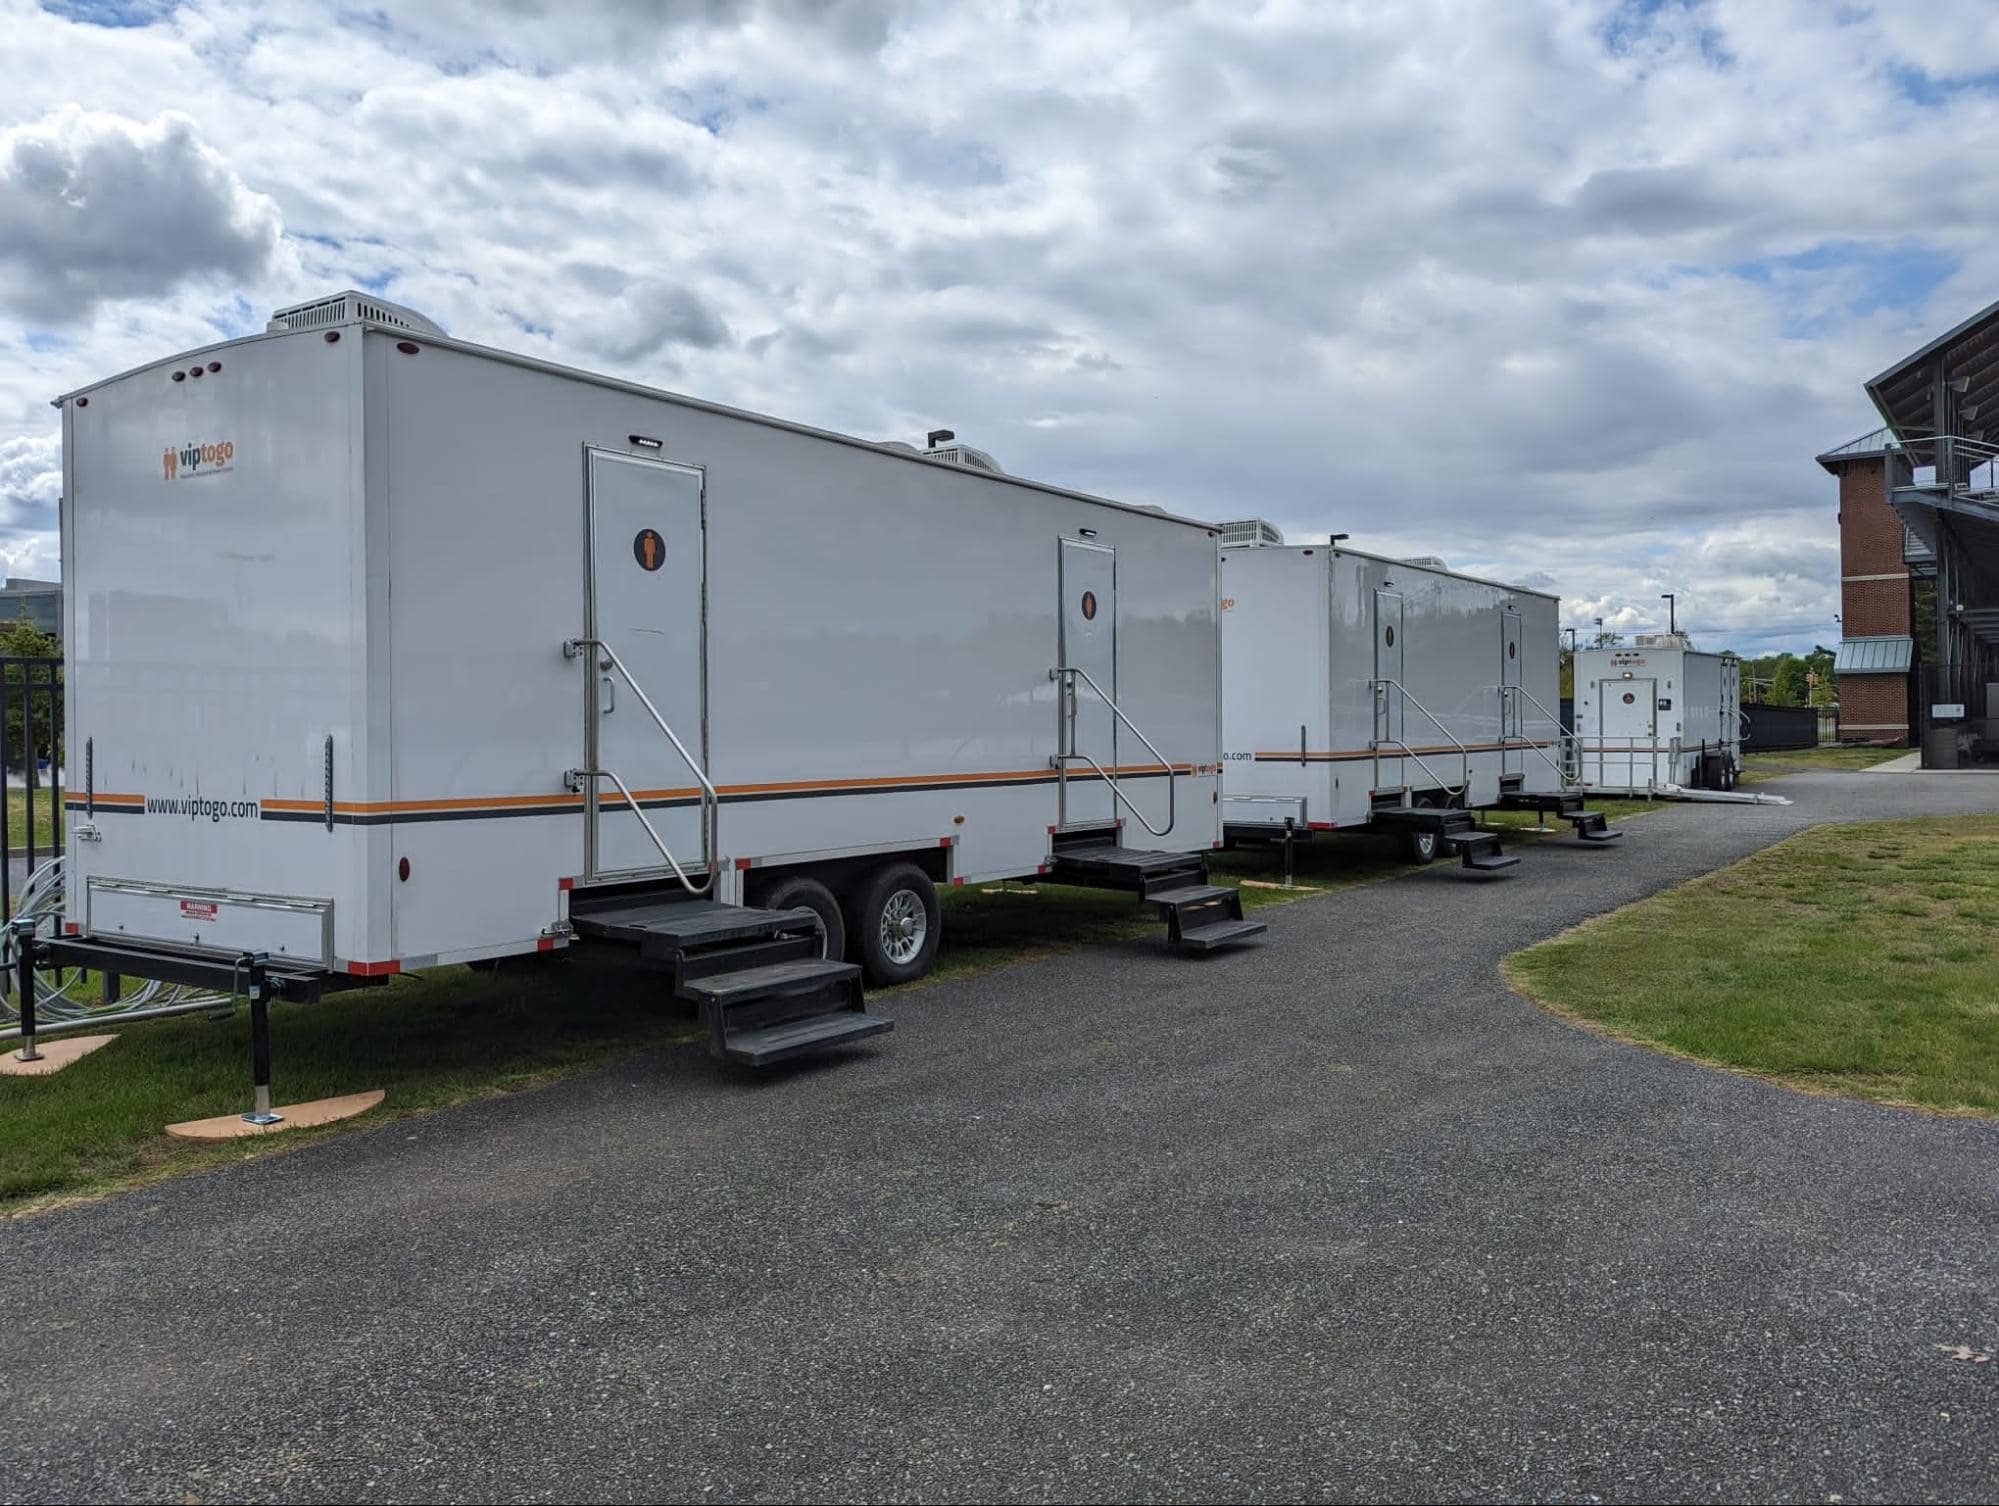 Luxury restroom trailers for Venice, FL event